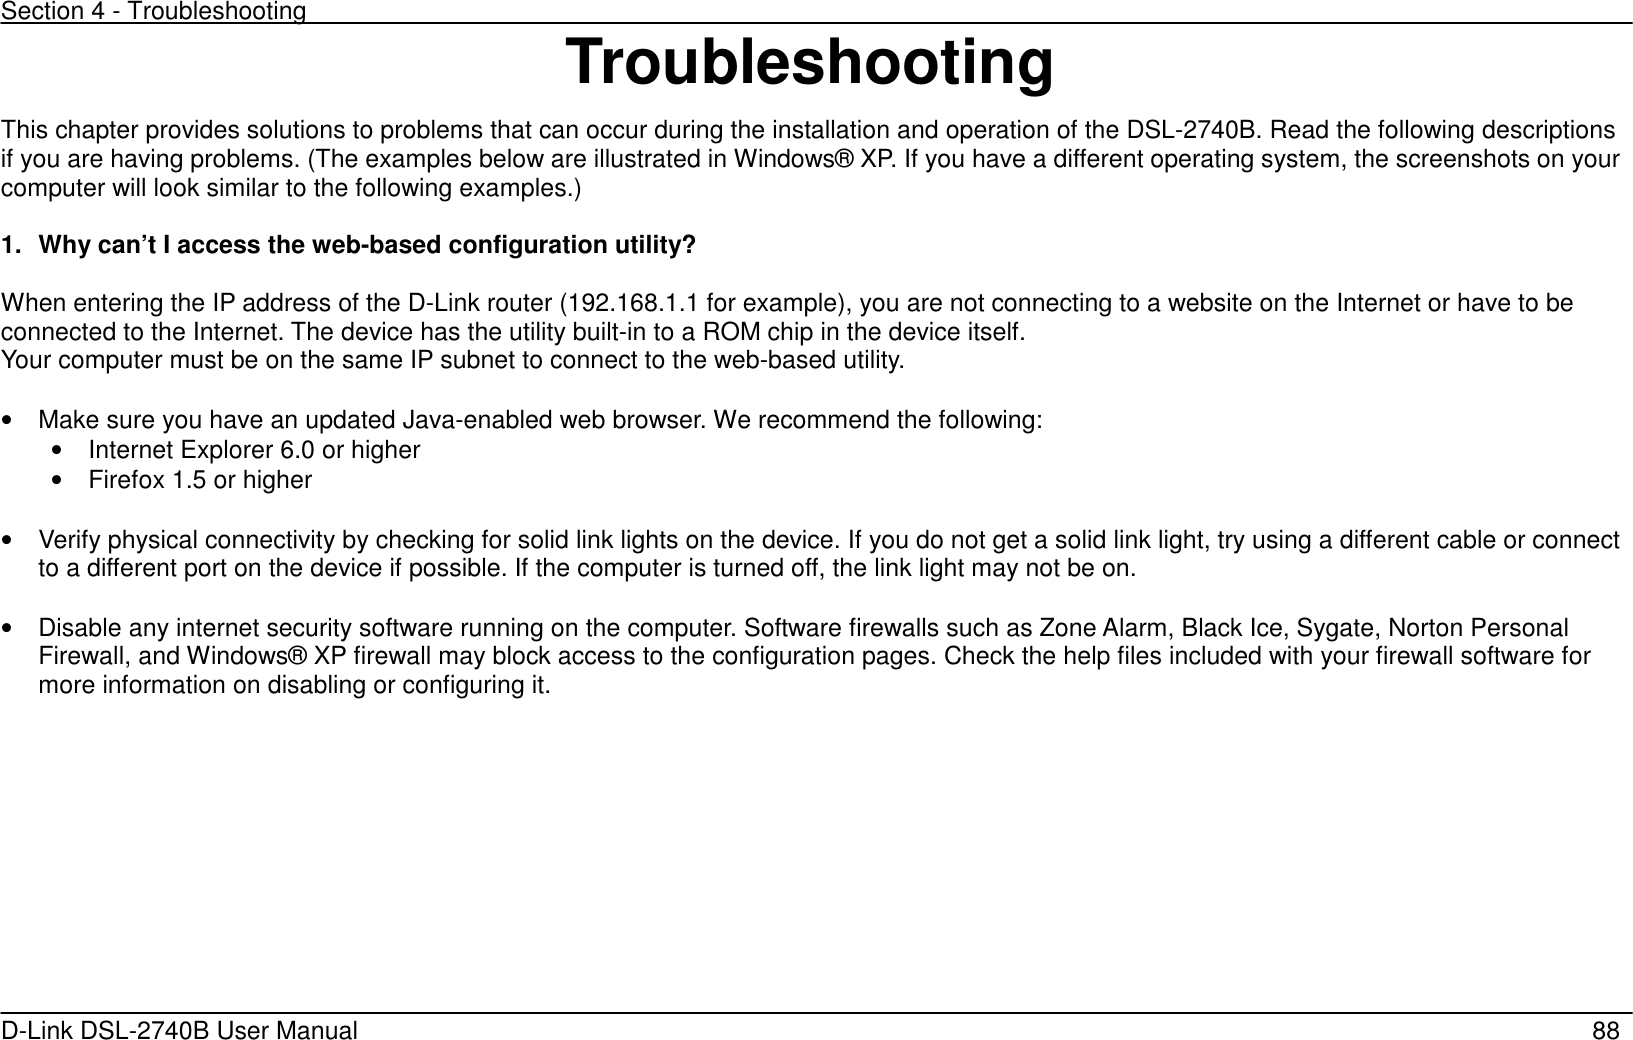 Section 4 - Troubleshooting   D-Link DSL-2740B User Manual                                                  88 Troubleshooting This chapter provides solutions to problems that can occur during the installation and operation of the DSL-2740B. Read the following descriptions if you are having problems. (The examples below are illustrated in Windows® XP. If you have a different operating system, the screenshots on your computer will look similar to the following examples.)    1.  Why can’t I access the web-based configuration utility?  When entering the IP address of the D-Link router (192.168.1.1 for example), you are not connecting to a website on the Internet or have to be connected to the Internet. The device has the utility built-in to a ROM chip in the device itself.   Your computer must be on the same IP subnet to connect to the web-based utility.  •  Make sure you have an updated Java-enabled web browser. We recommend the following: •  Internet Explorer 6.0 or higher •  Firefox 1.5 or higher  •  Verify physical connectivity by checking for solid link lights on the device. If you do not get a solid link light, try using a different cable or connect to a different port on the device if possible. If the computer is turned off, the link light may not be on.  •  Disable any internet security software running on the computer. Software firewalls such as Zone Alarm, Black Ice, Sygate, Norton Personal Firewall, and Windows® XP firewall may block access to the configuration pages. Check the help files included with your firewall software for more information on disabling or configuring it.   